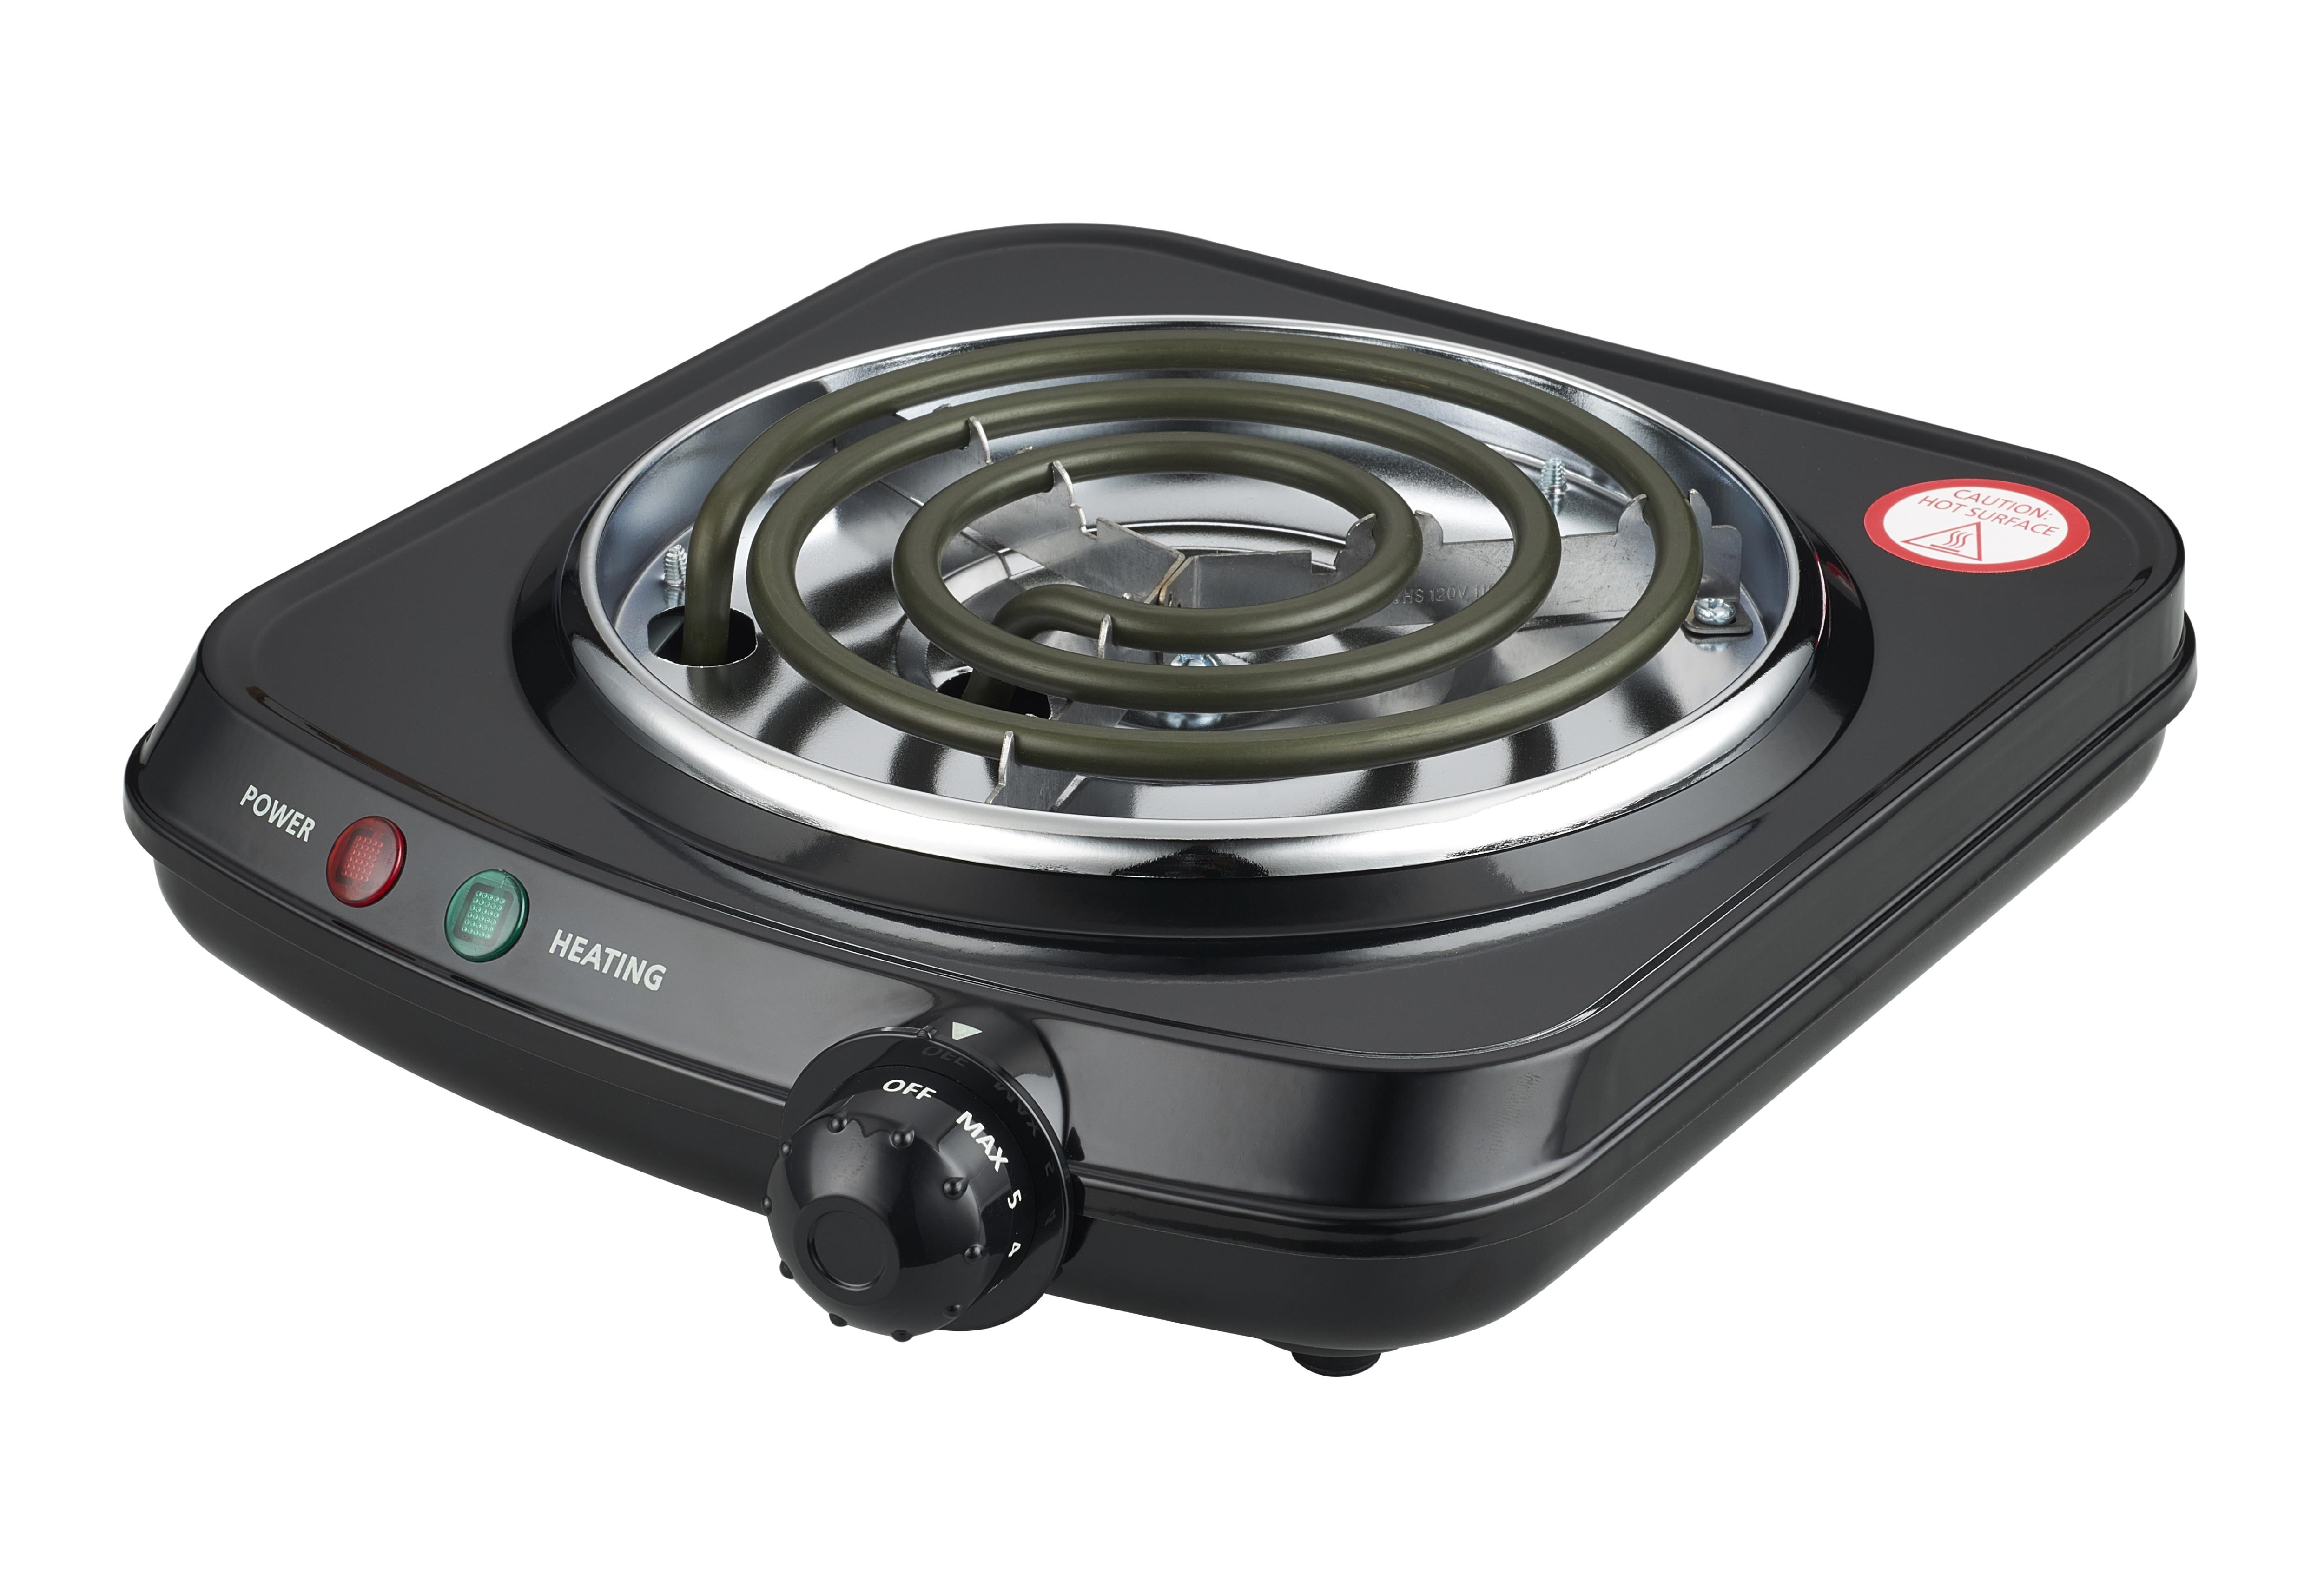 Generic iSH09-M450201mn ANHANE 1800W Electric Hot Plate Single  Burner,Portable Electric Stove for Cooking,Infrared Burner,4-Hour  Setting,Black Crystal